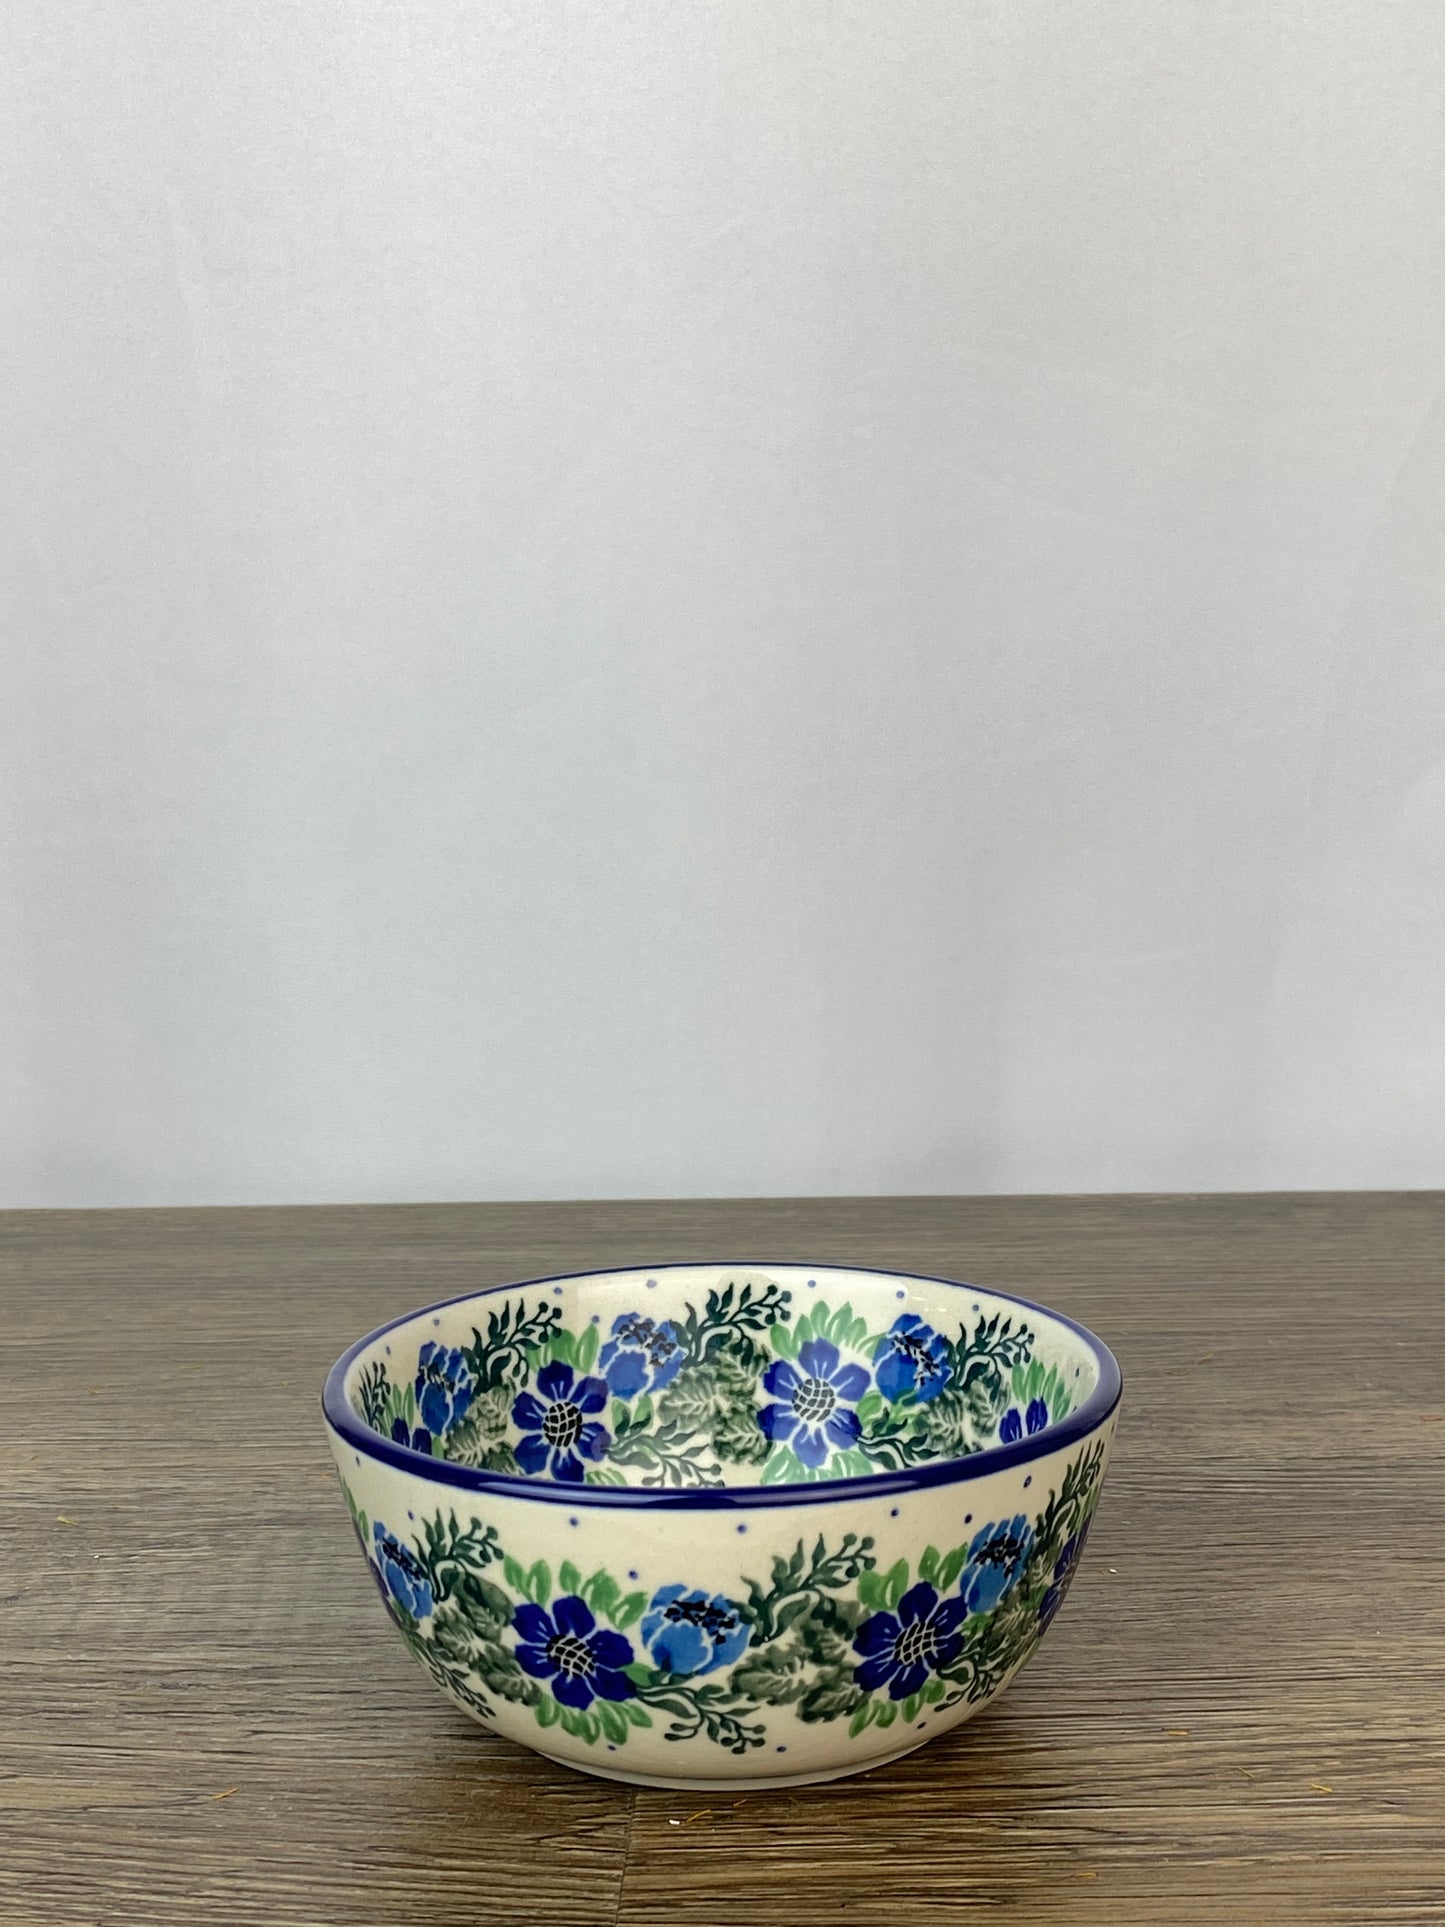 Small Cereal / Dessert Bowl - Shape 17 - Pattern 1534